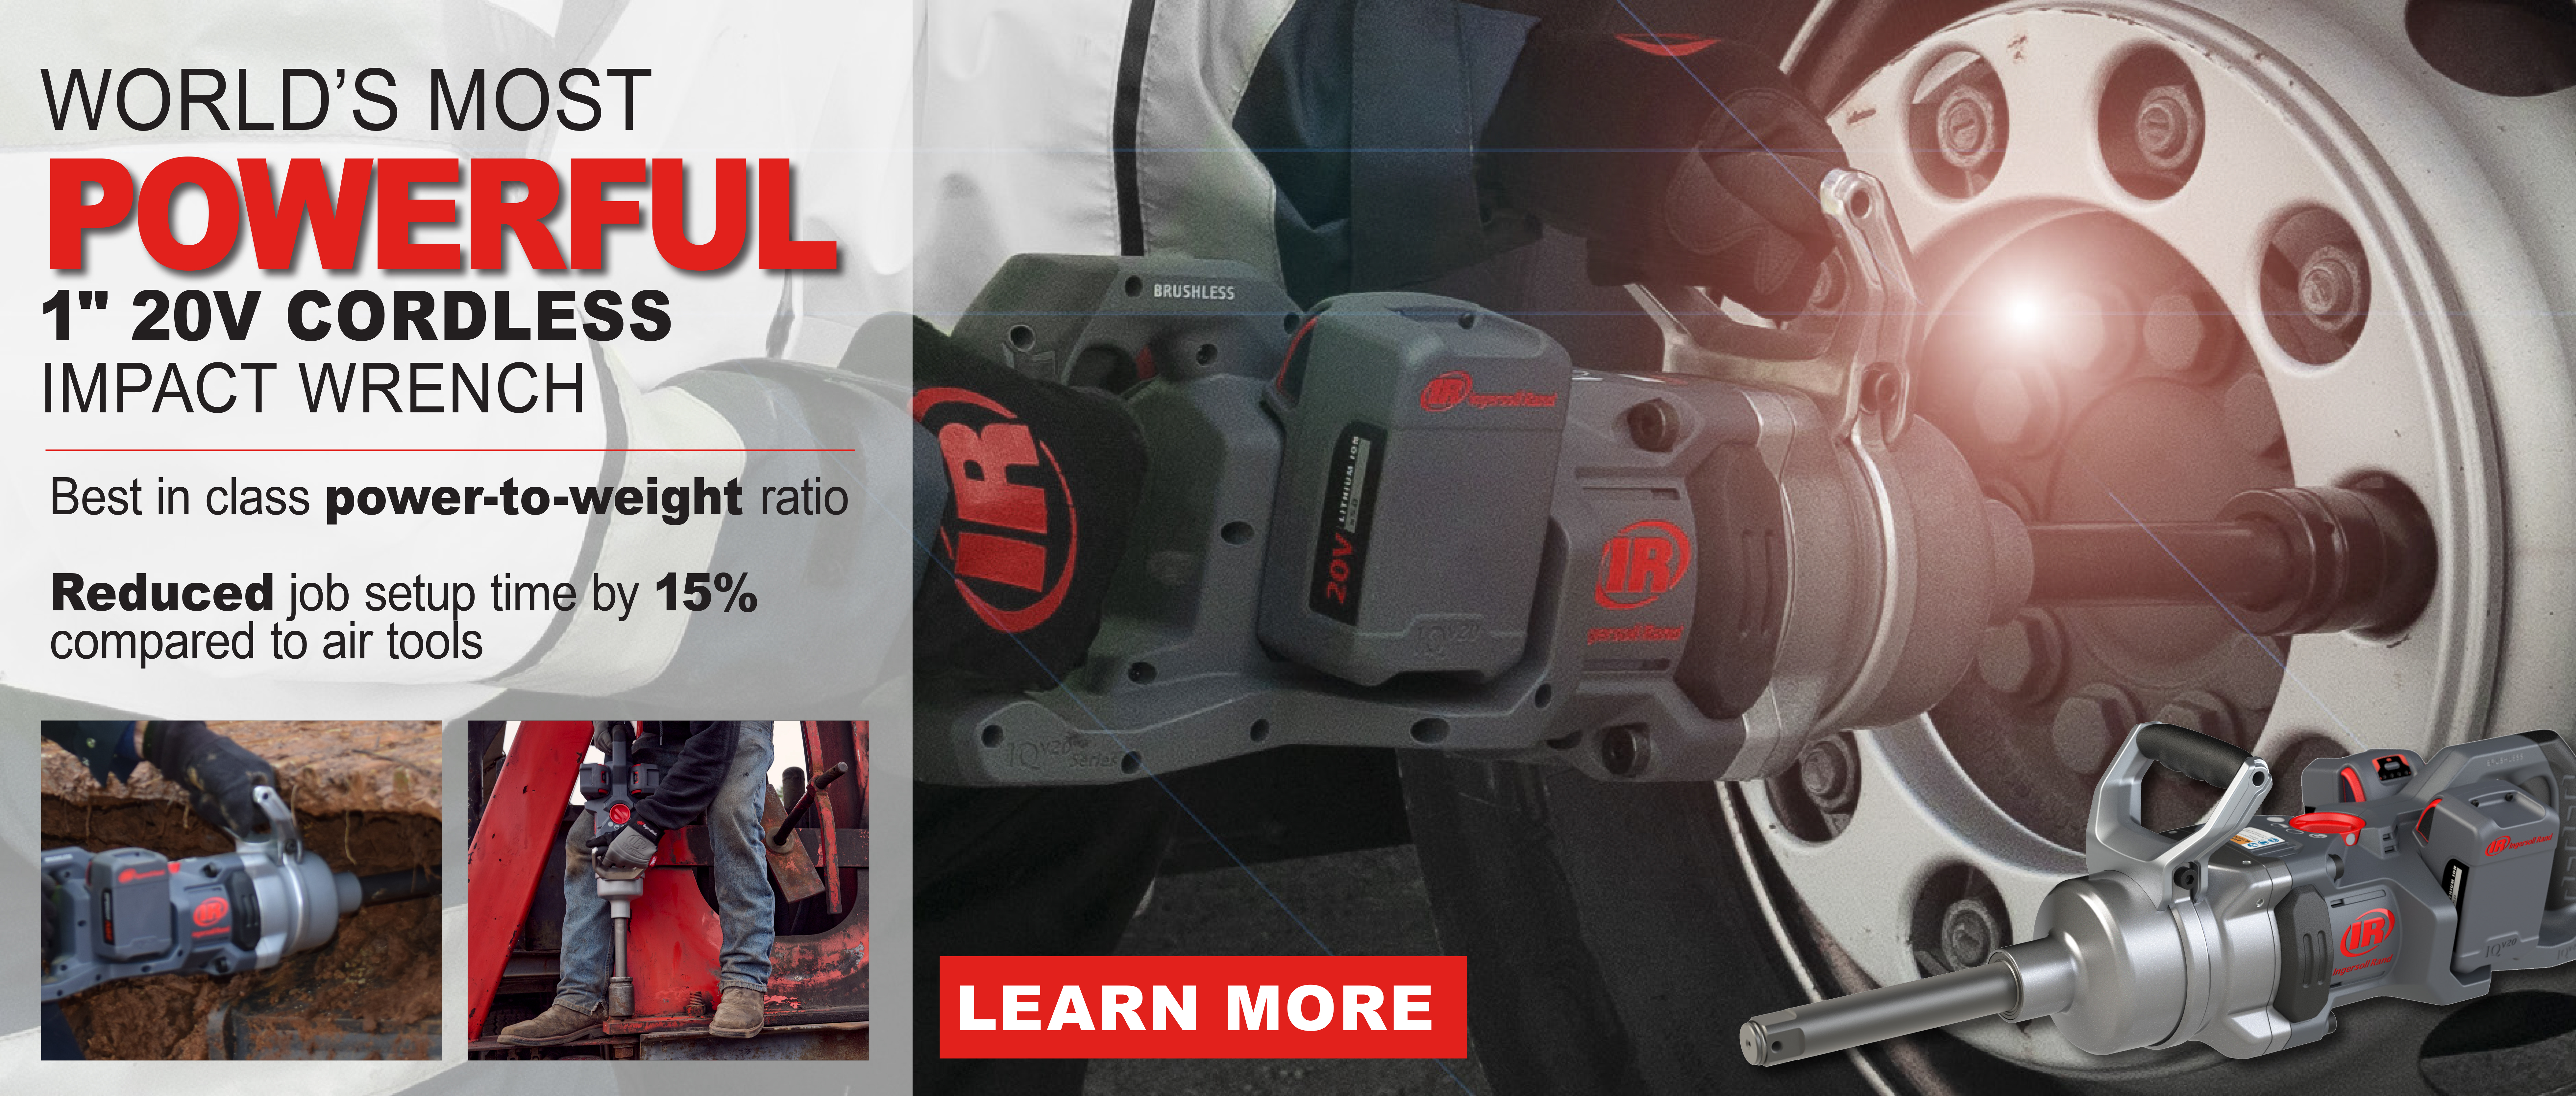 Meet the World's Most Powerful 1" 20V Cordless Impact Wrenches: Ingersoll Rand W9491 and W9691. Industry-leading power to weight ratio. Reduced job setup time compared to air tools.